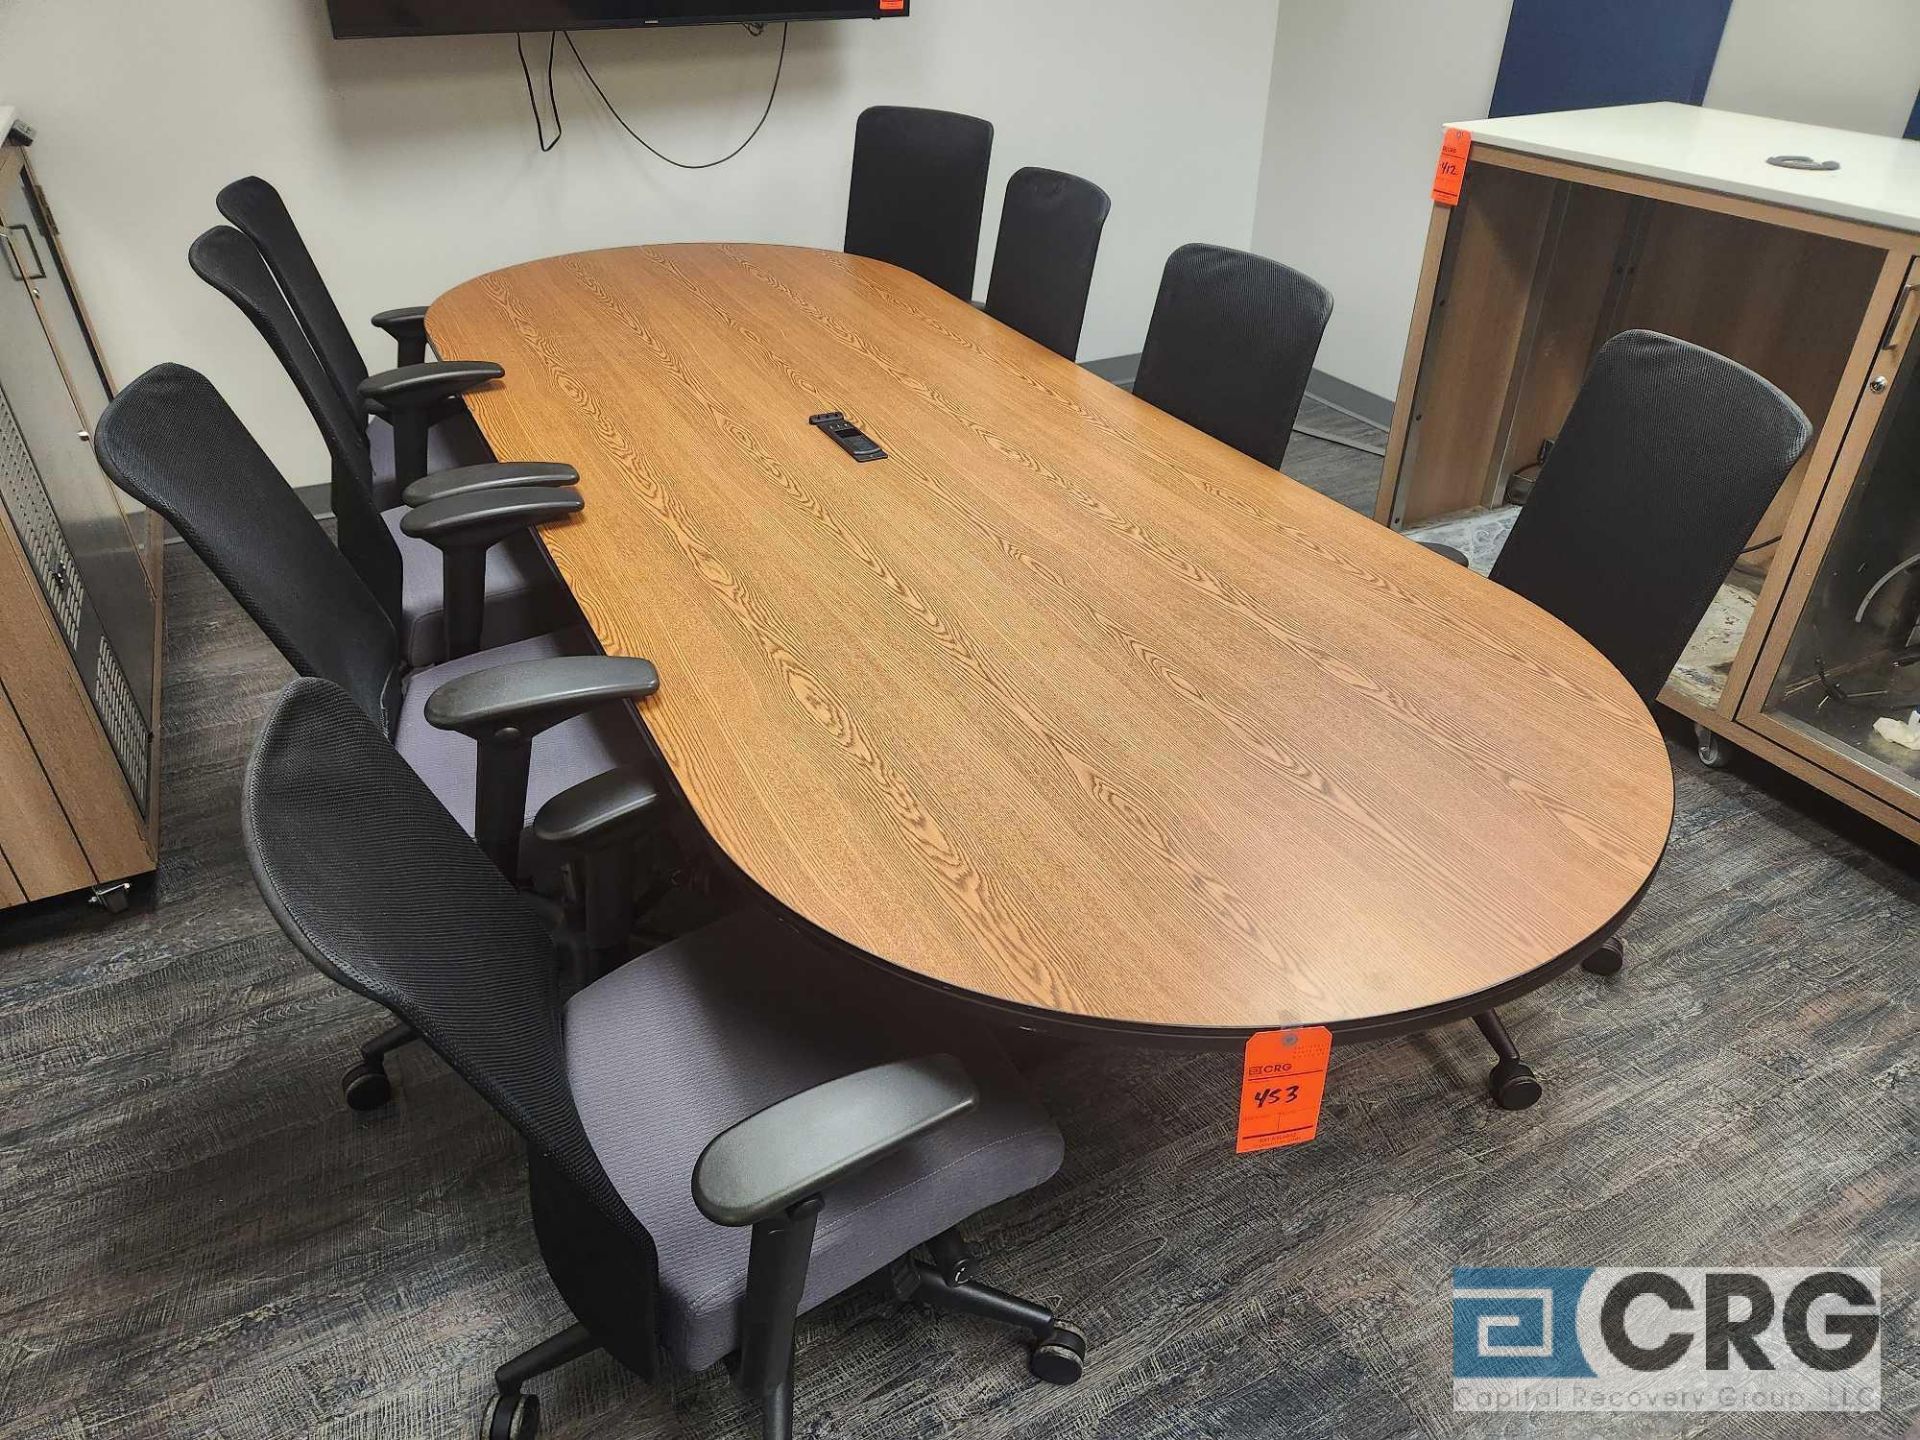 8 ft Wood Conference Table and Executive Chairs